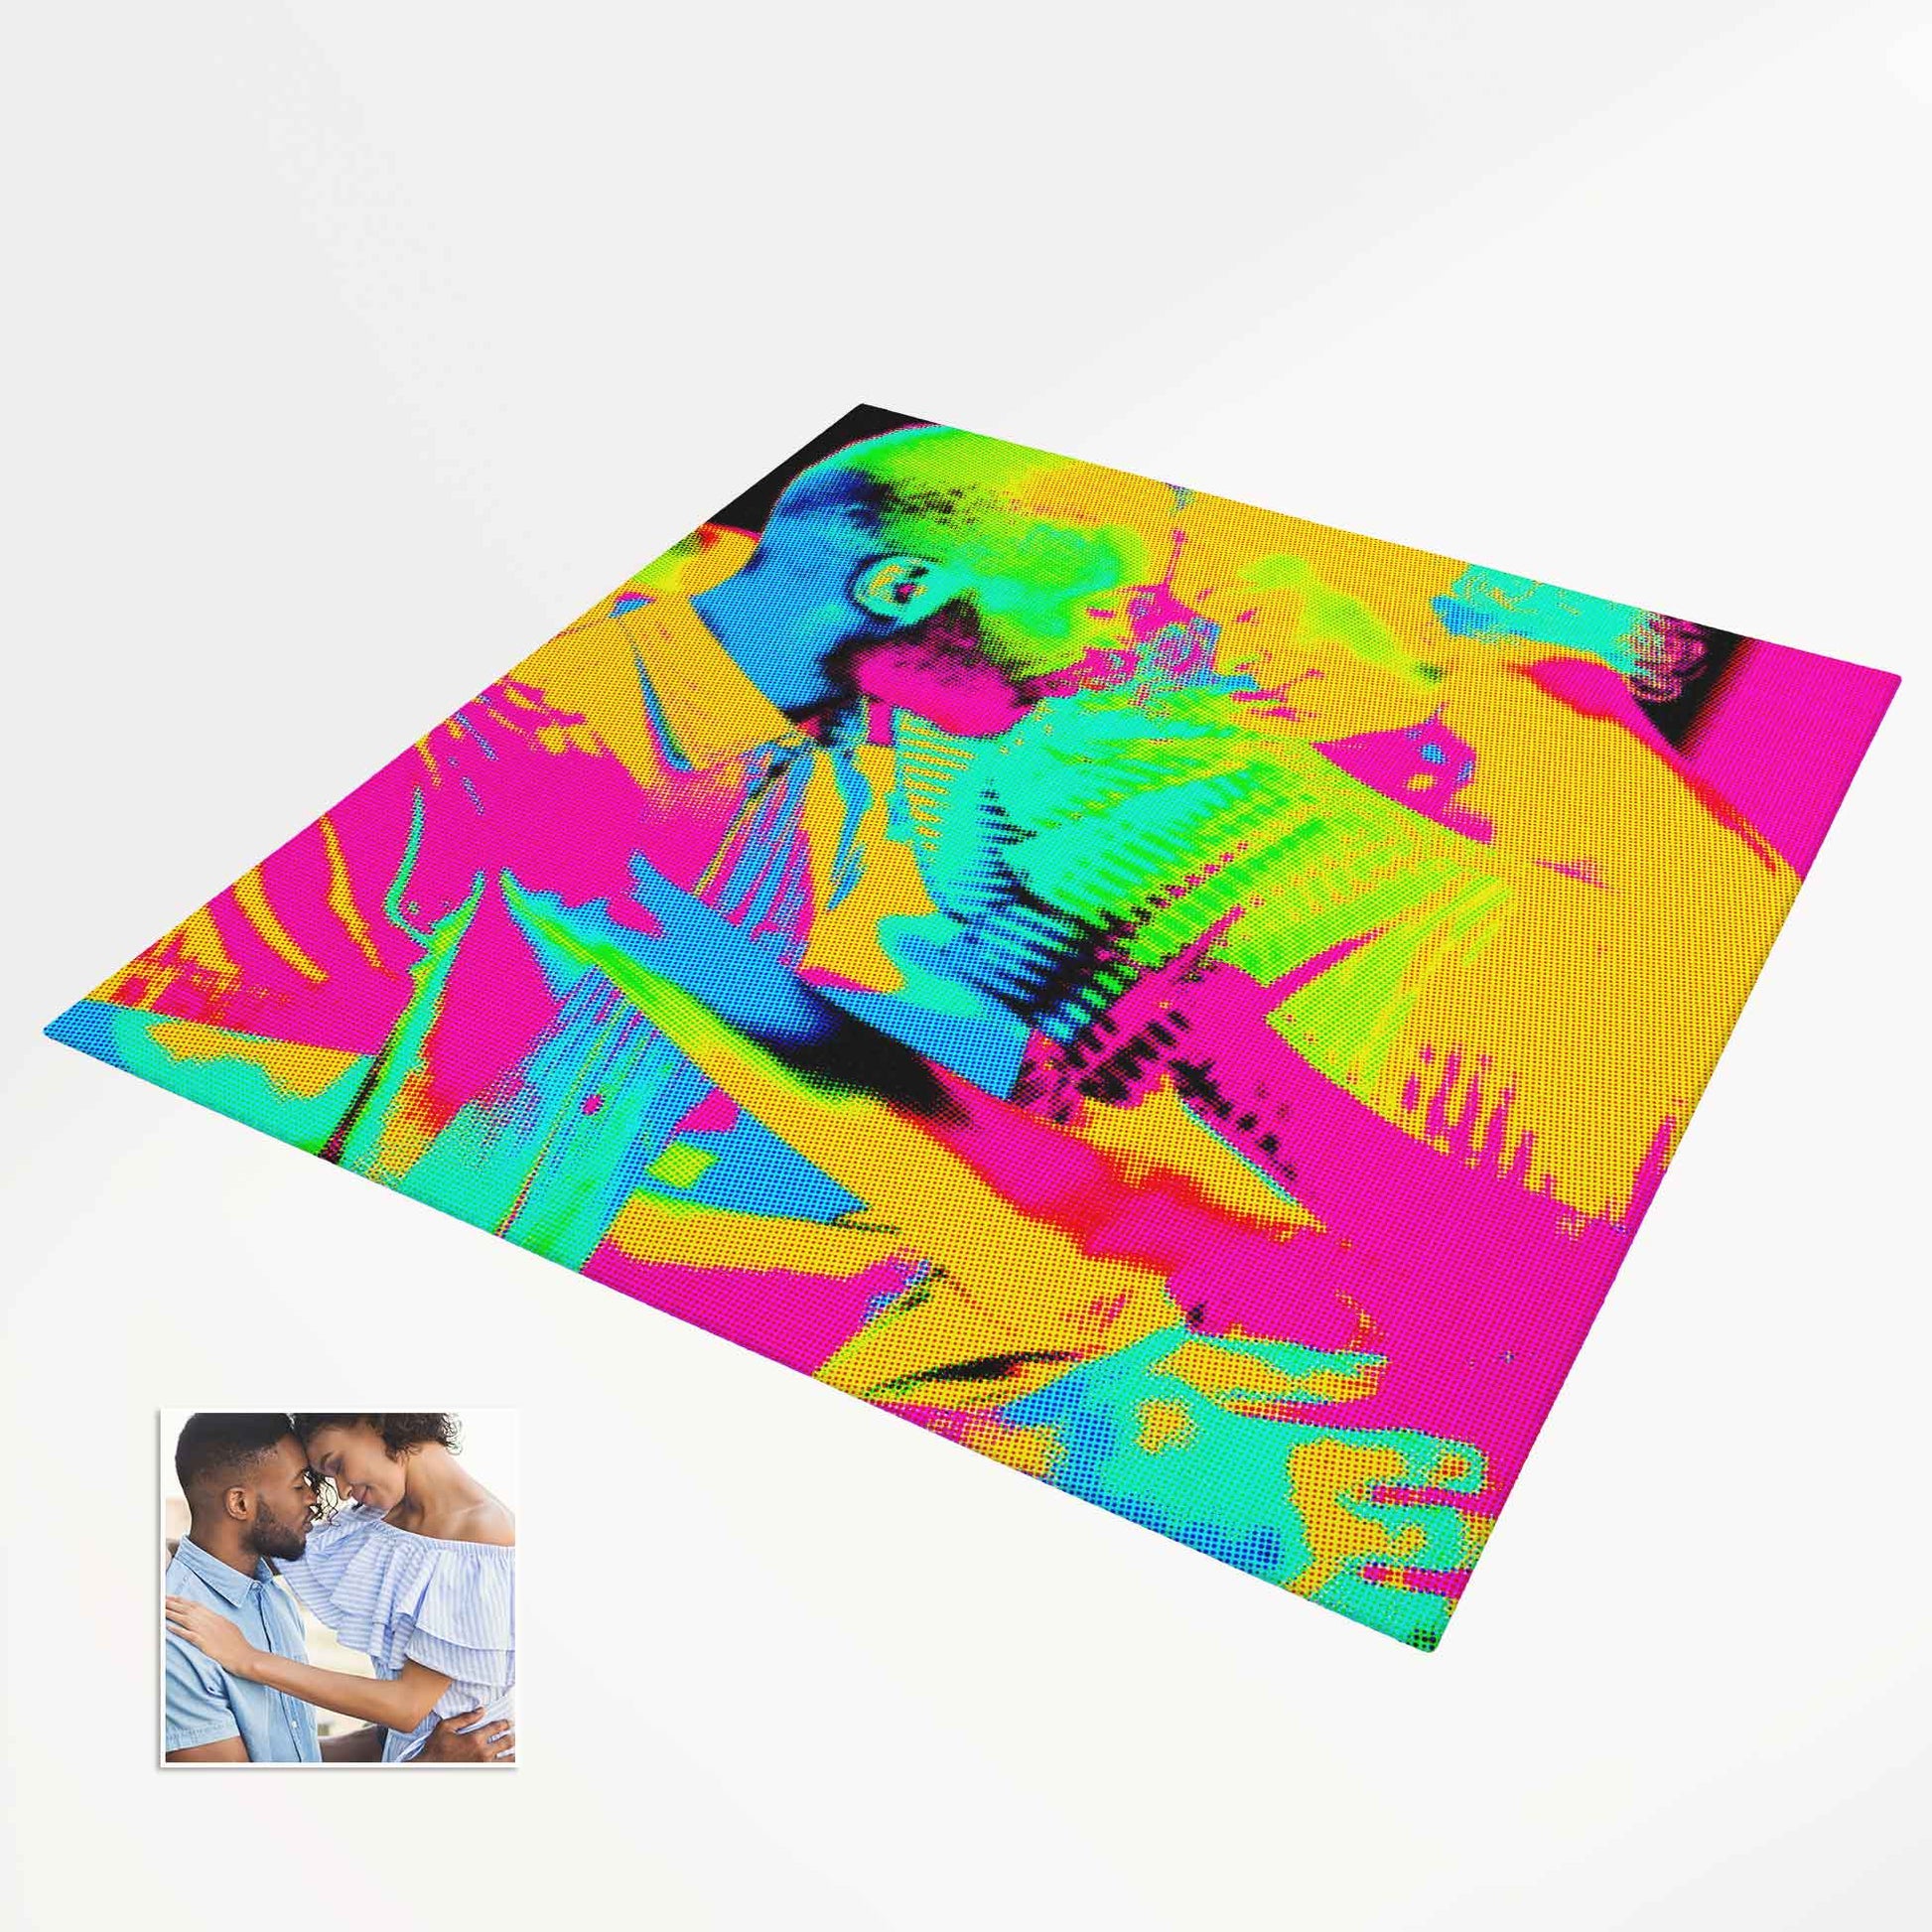 Make a statement with our Personalised Pop Art Photo Rug Carpet Mat. Bold colours and custom design for a one-of-a-kind look